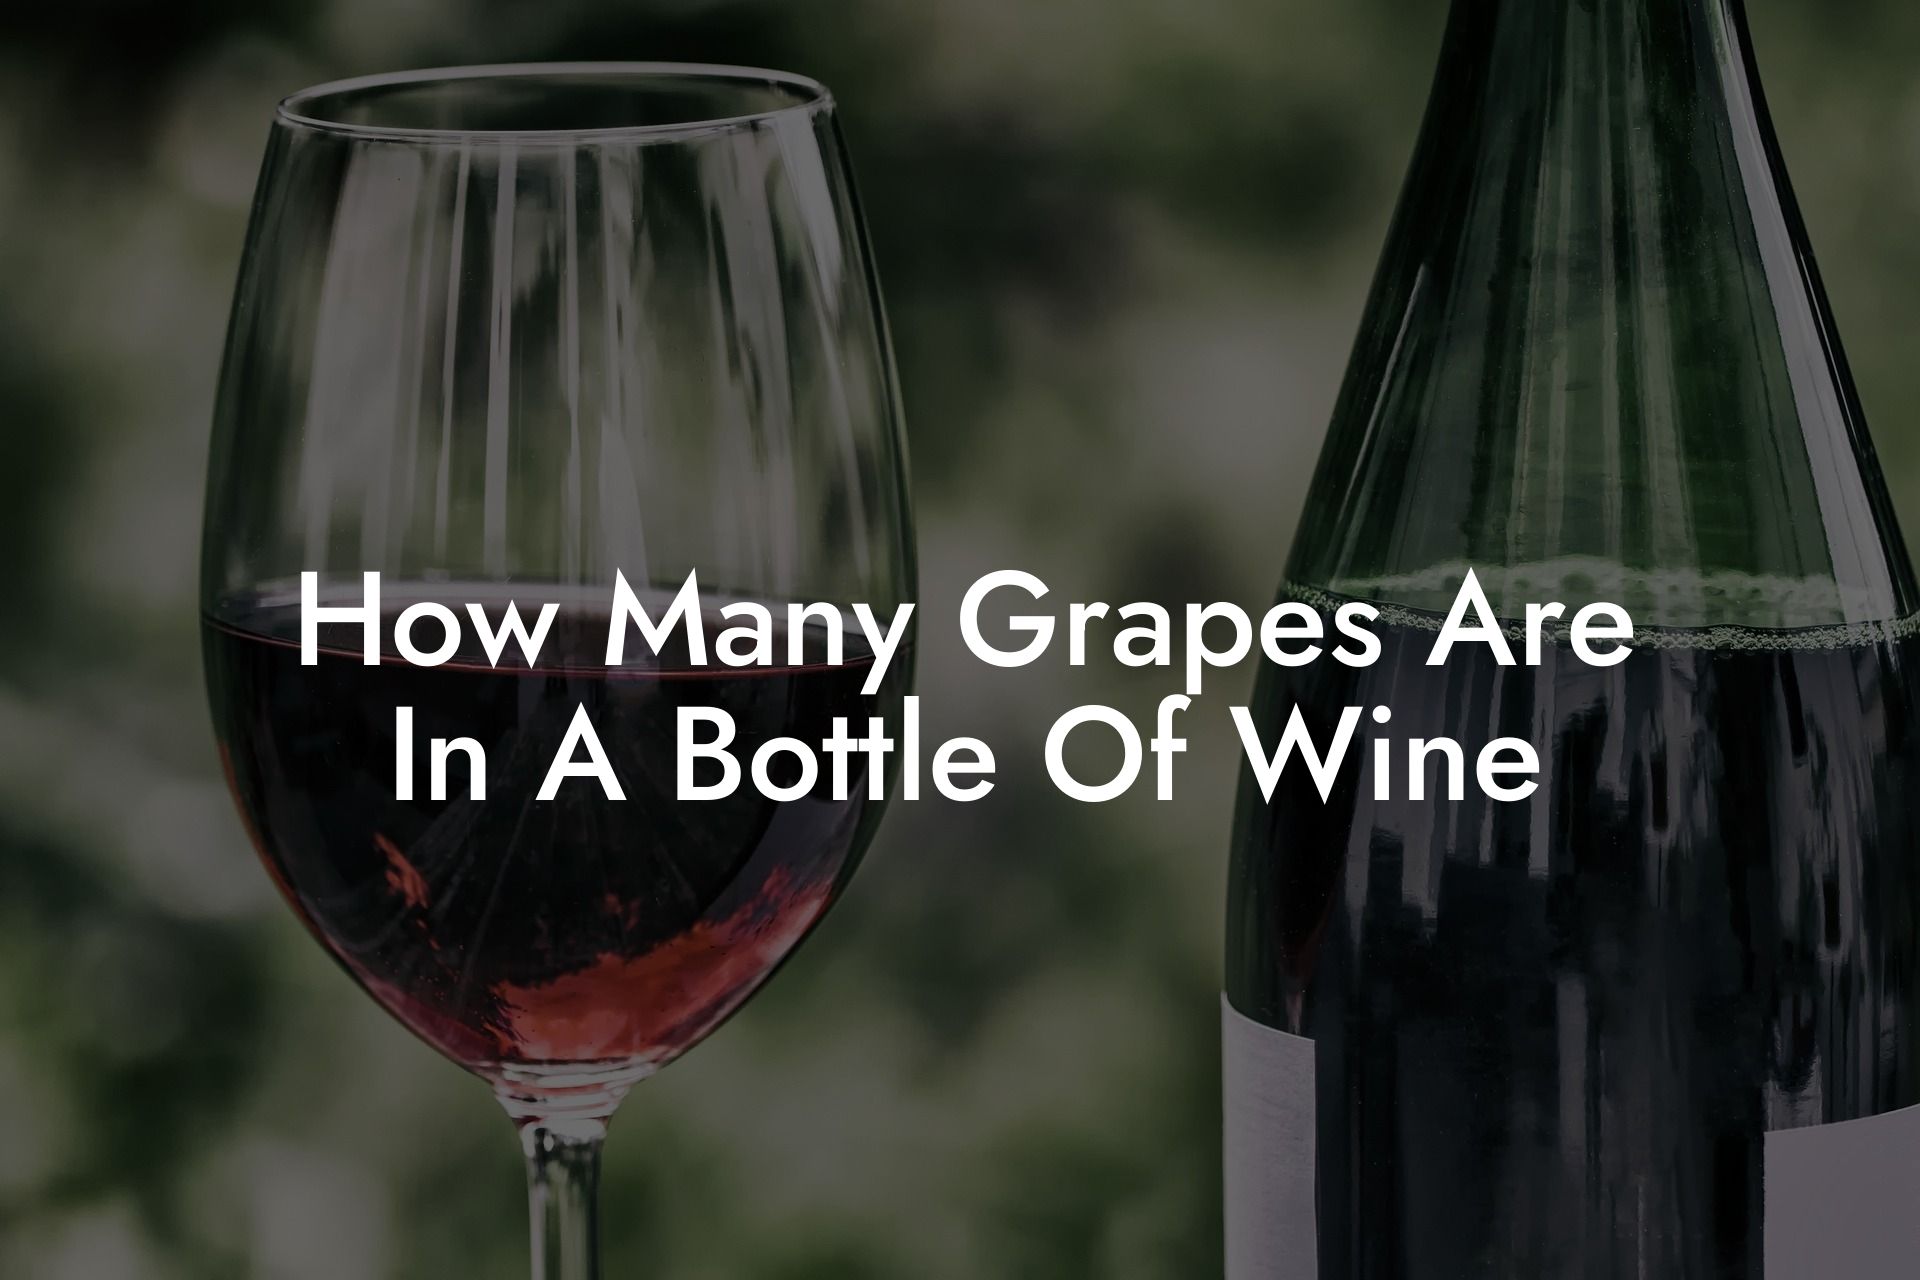 How Many Grapes Are In A Bottle Of Wine